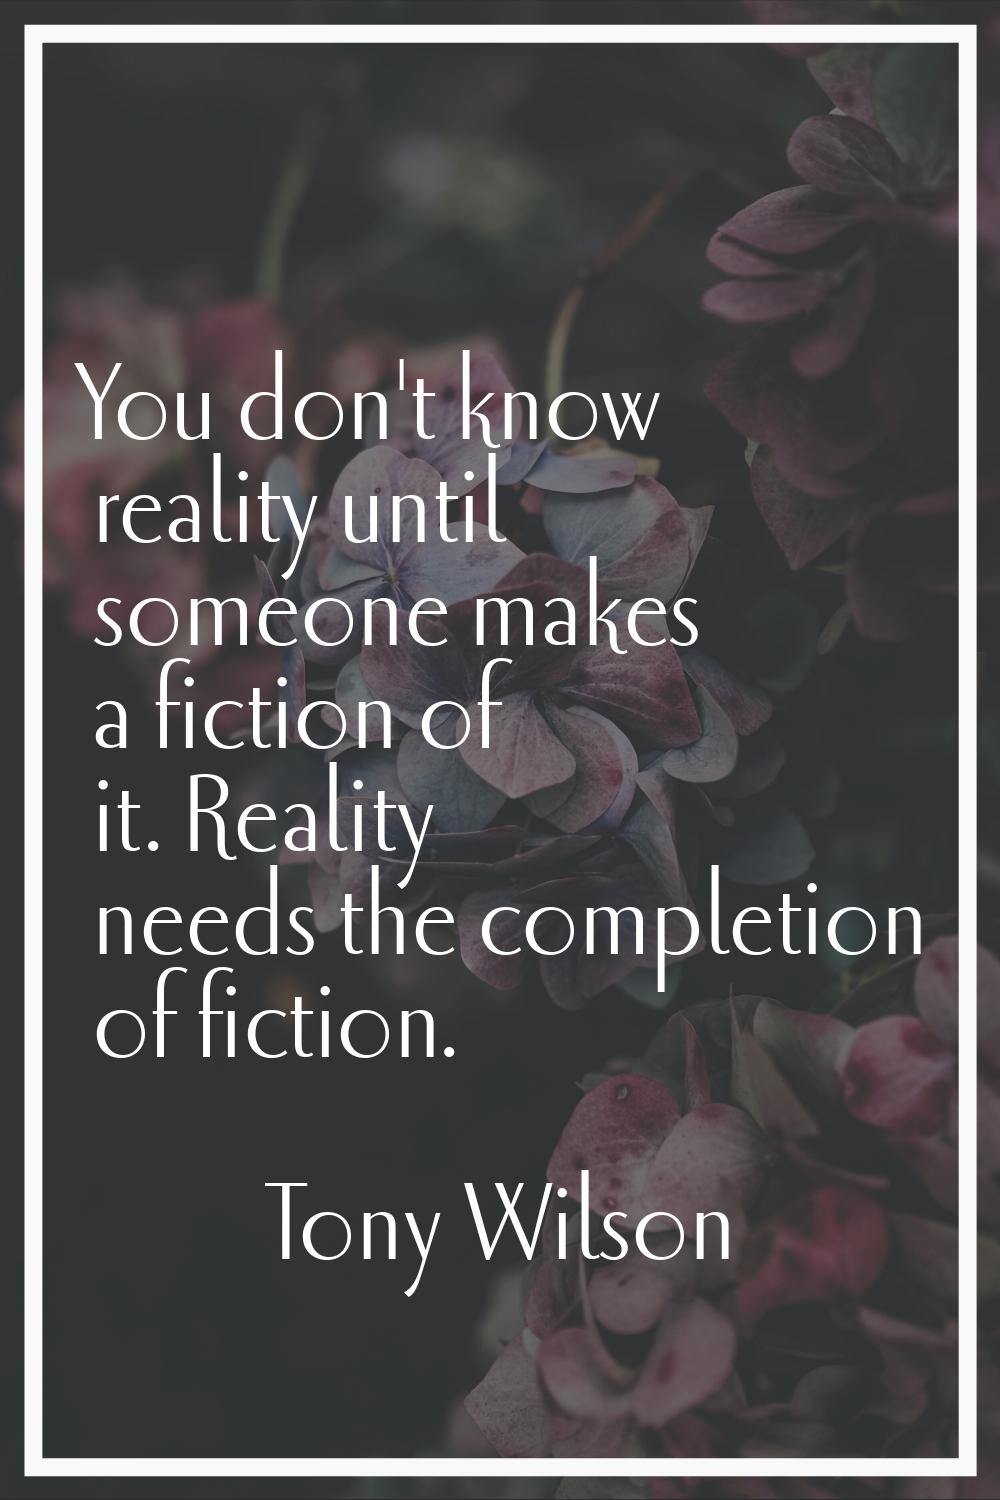 You don't know reality until someone makes a fiction of it. Reality needs the completion of fiction